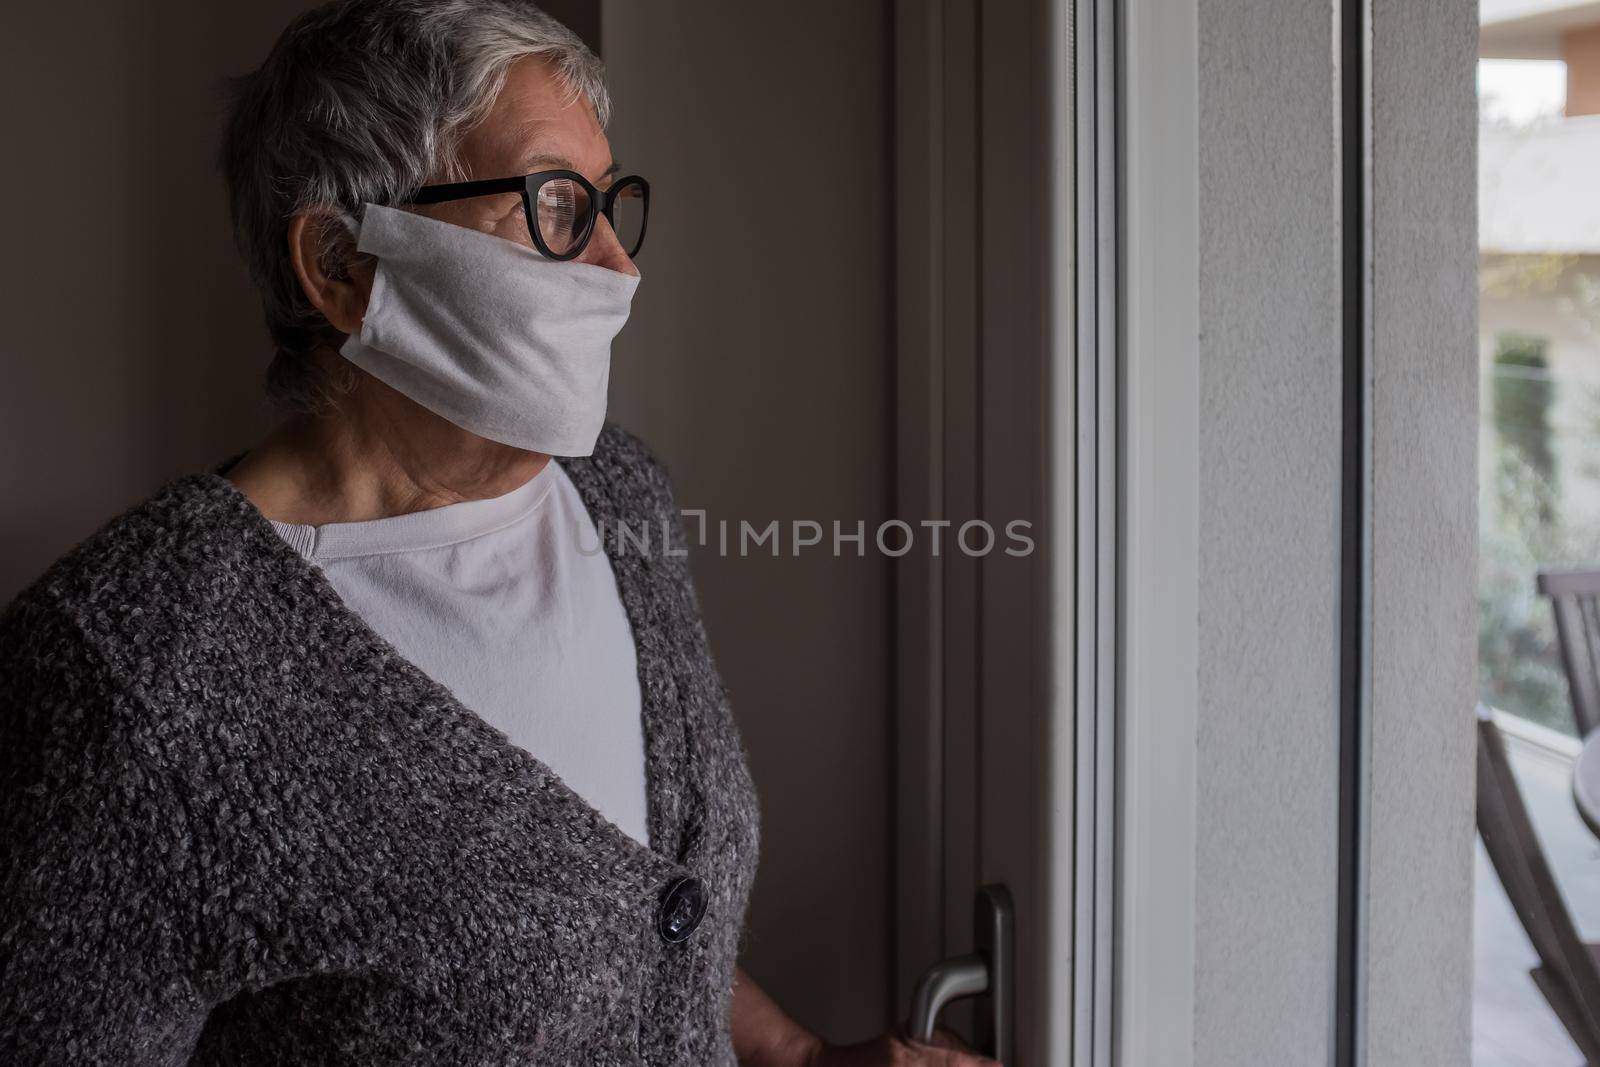 The life under Italy's coronavirus lockdown. Senior woman with mask looking worriedly out of the window. Brescia (Lombardy). by Riccarduska